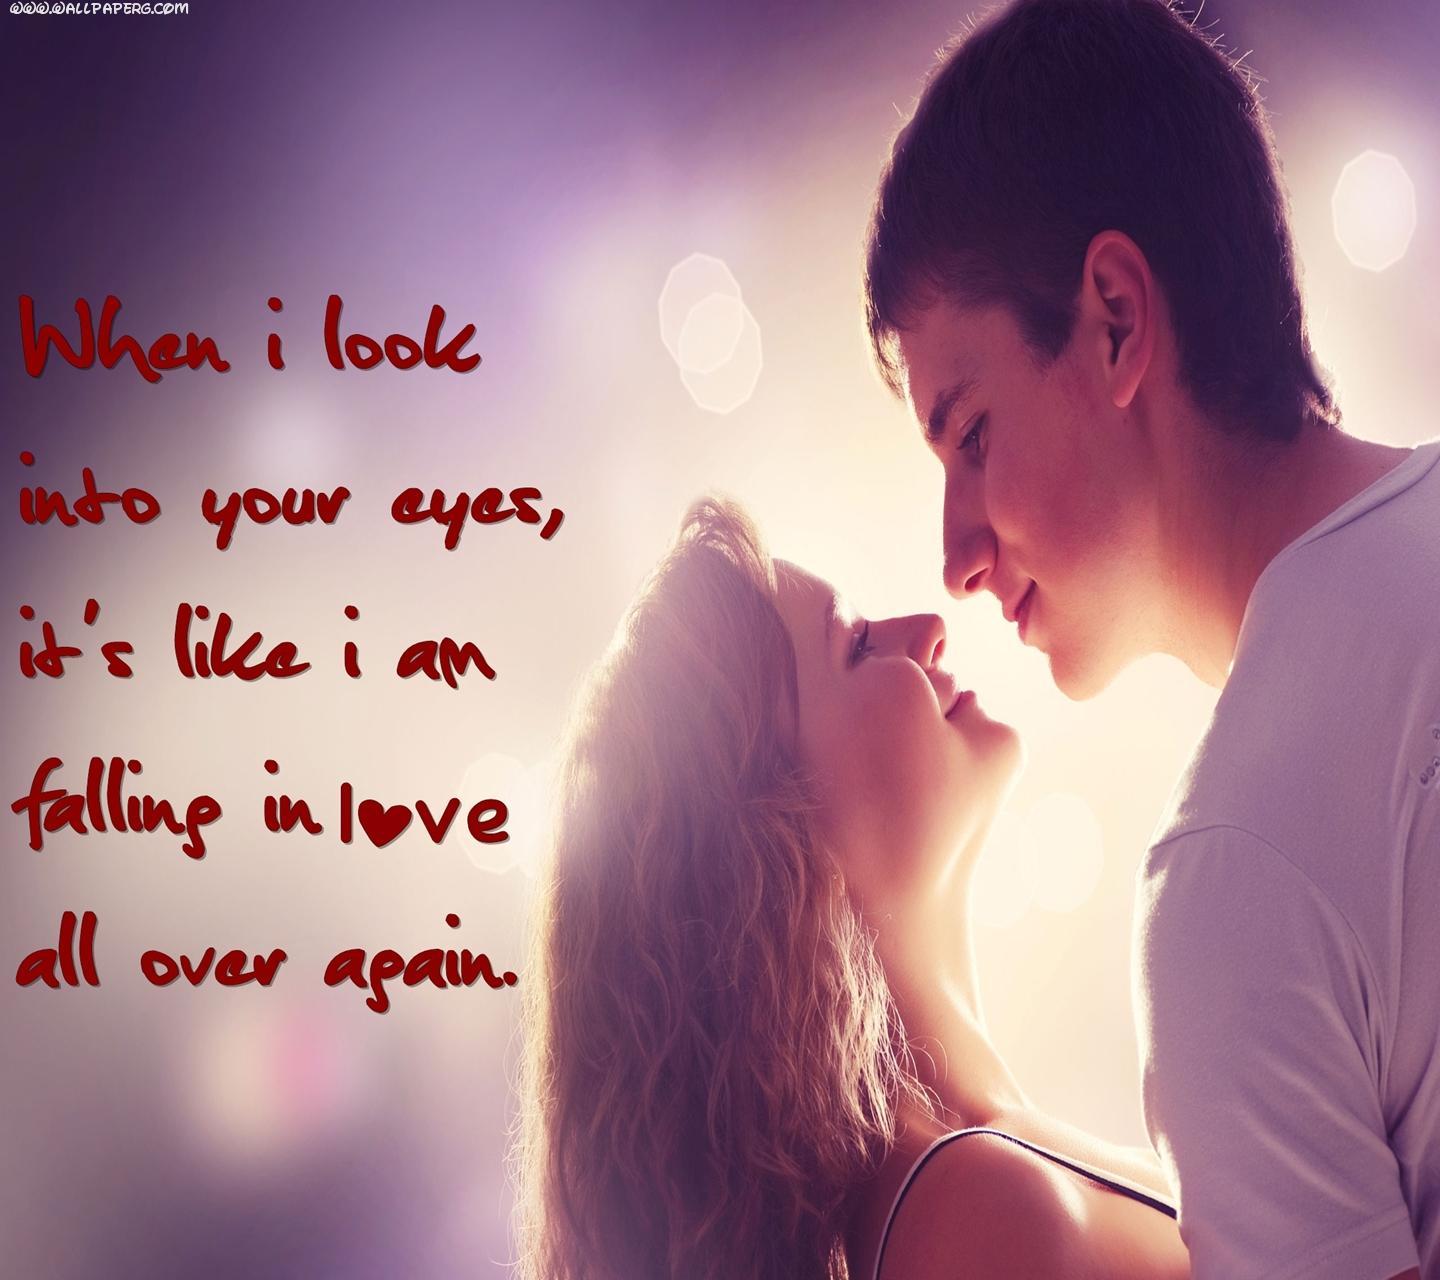 Download Falling inlove - Romantic wallpapers for your mobile cell phone